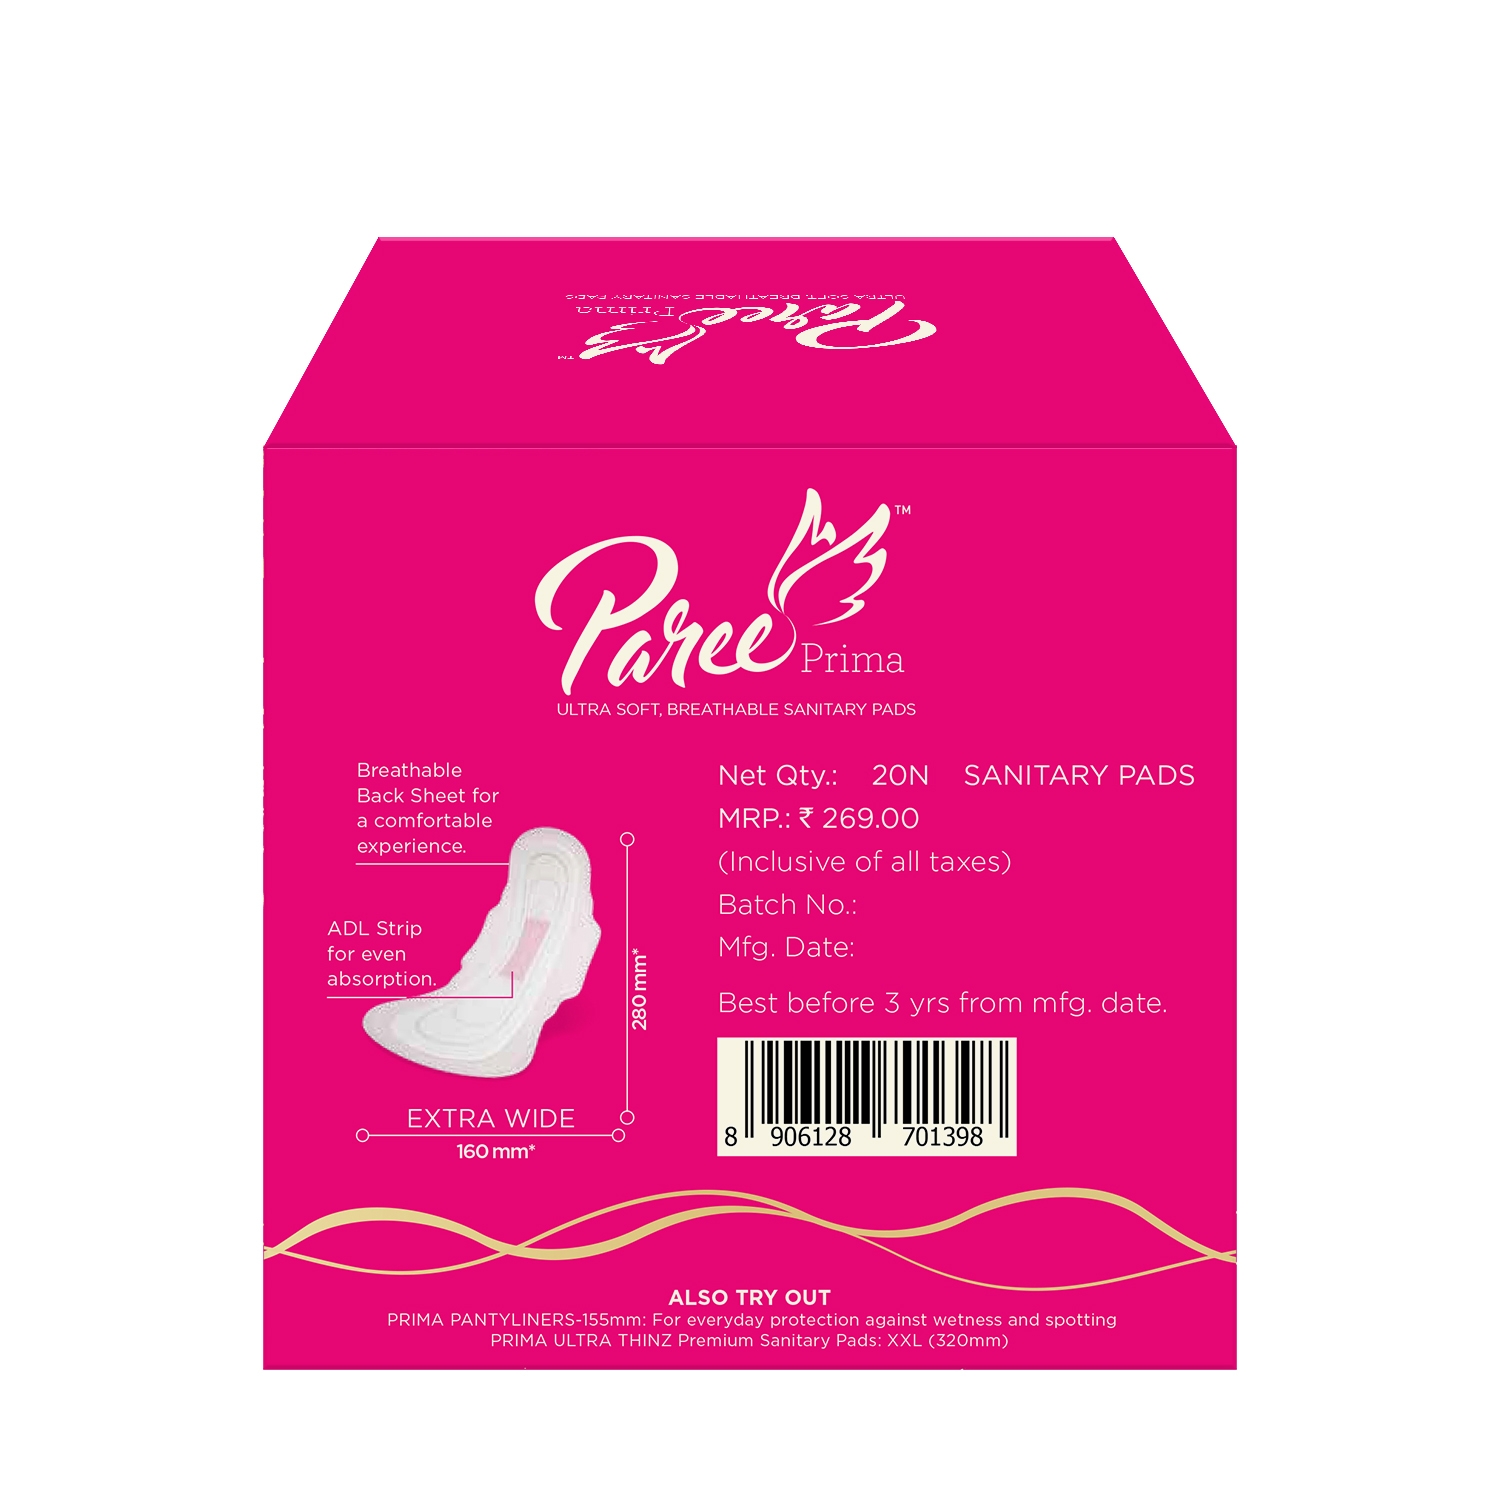 Paree | Paree Prima Premium Ultra Soft Breathable XL Sanitary Pads for Heavy Flow, With Biodegradable Disposable Bags, 20 Pads 1